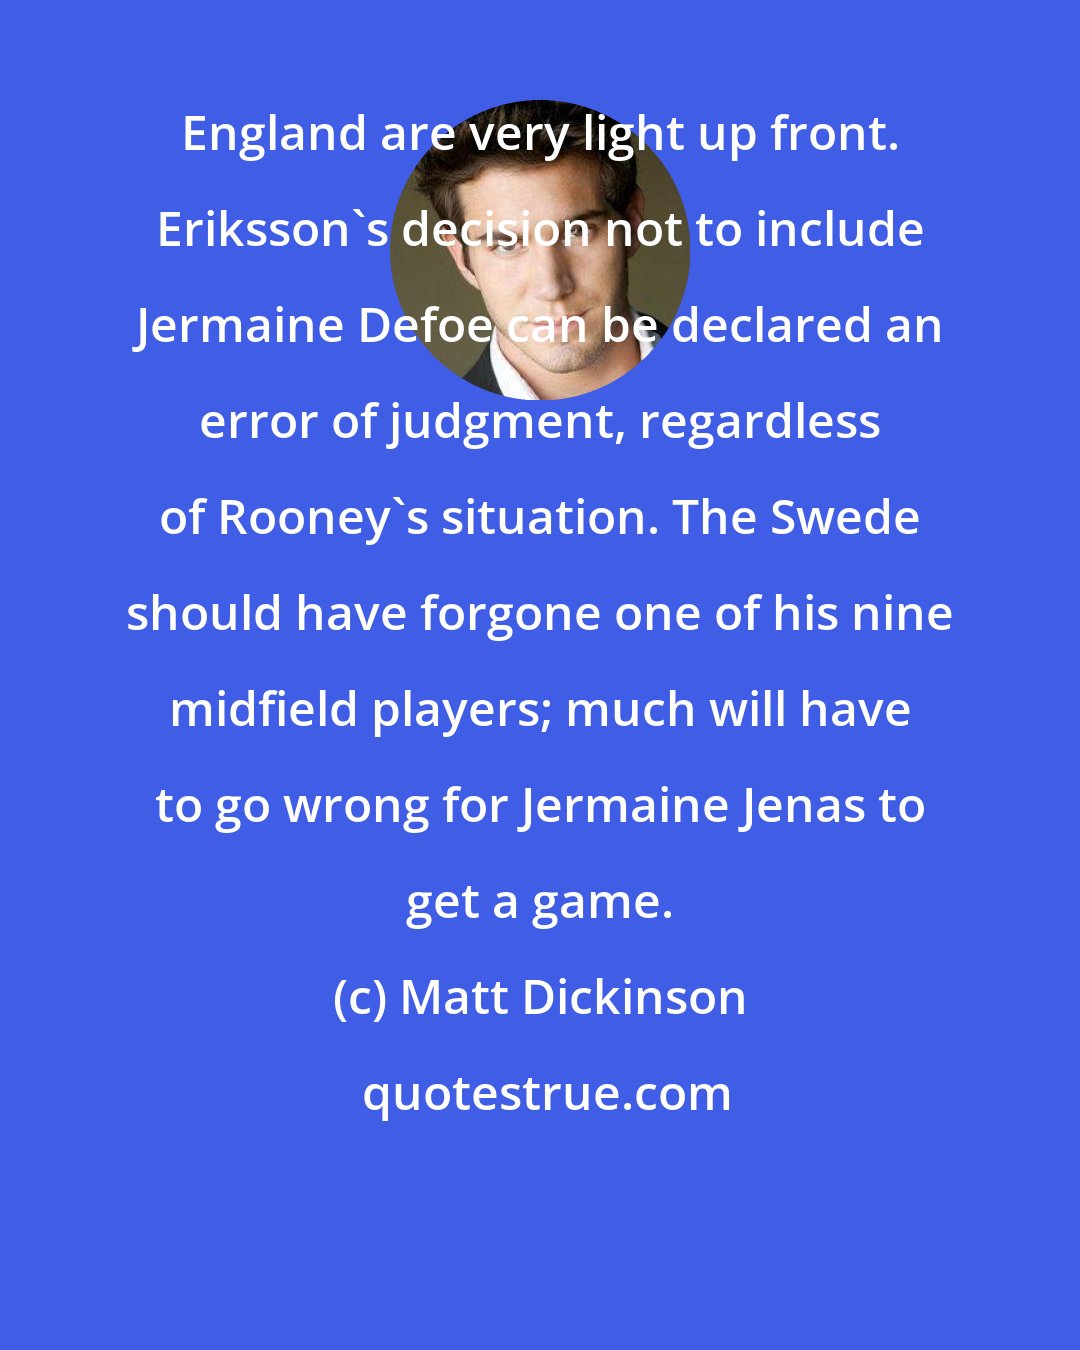 Matt Dickinson: England are very light up front. Eriksson's decision not to include Jermaine Defoe can be declared an error of judgment, regardless of Rooney's situation. The Swede should have forgone one of his nine midfield players; much will have to go wrong for Jermaine Jenas to get a game.